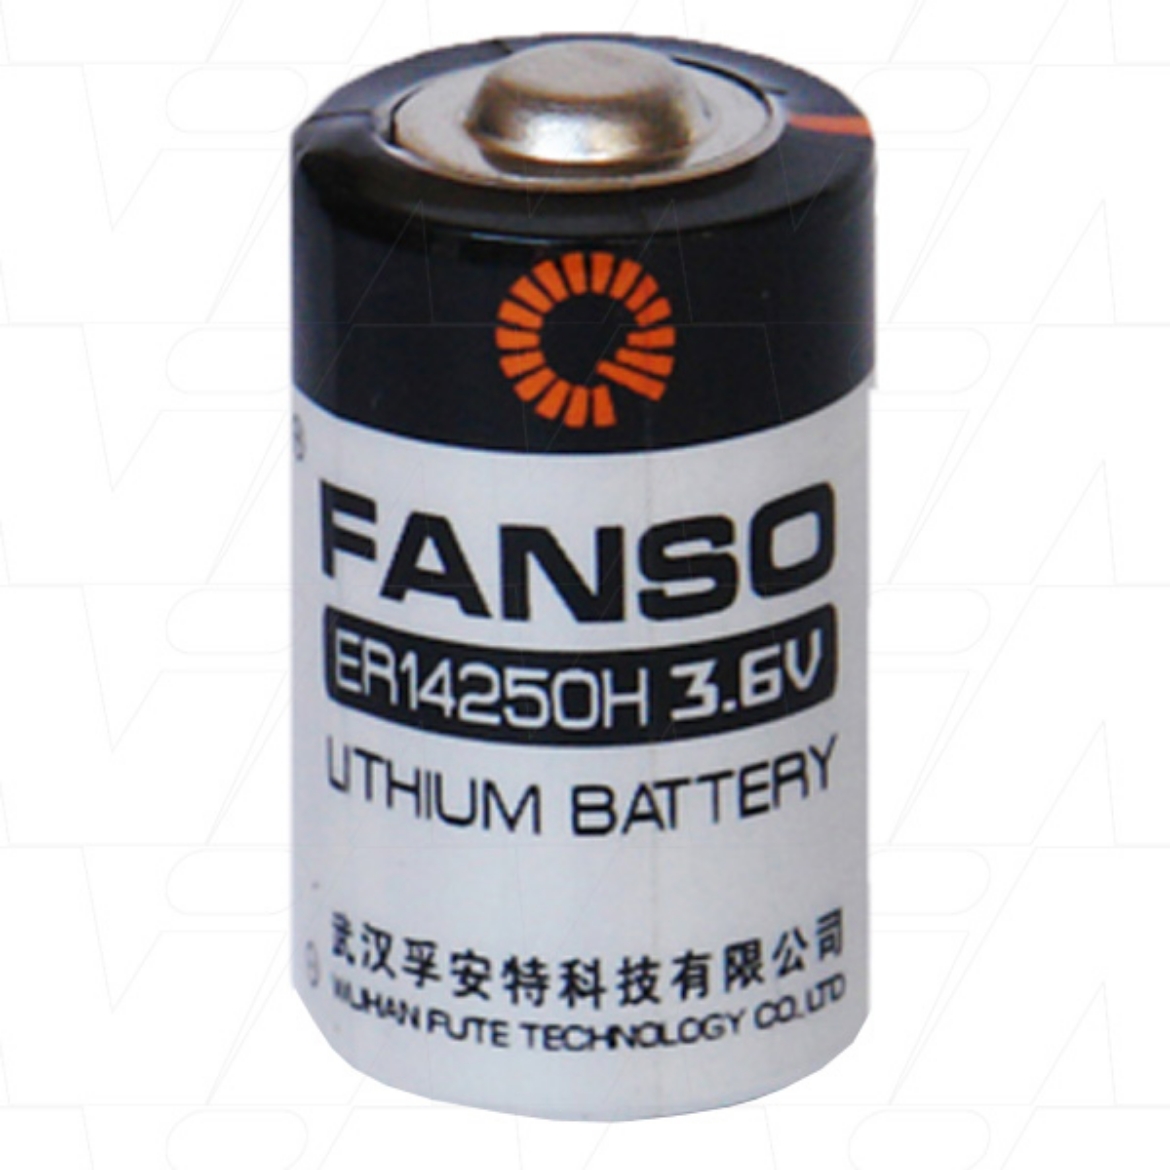 Picture of FANSO 1/2AA 3.6V 1.2AH LISOC12-LITHIUM BATTERY (MBU)